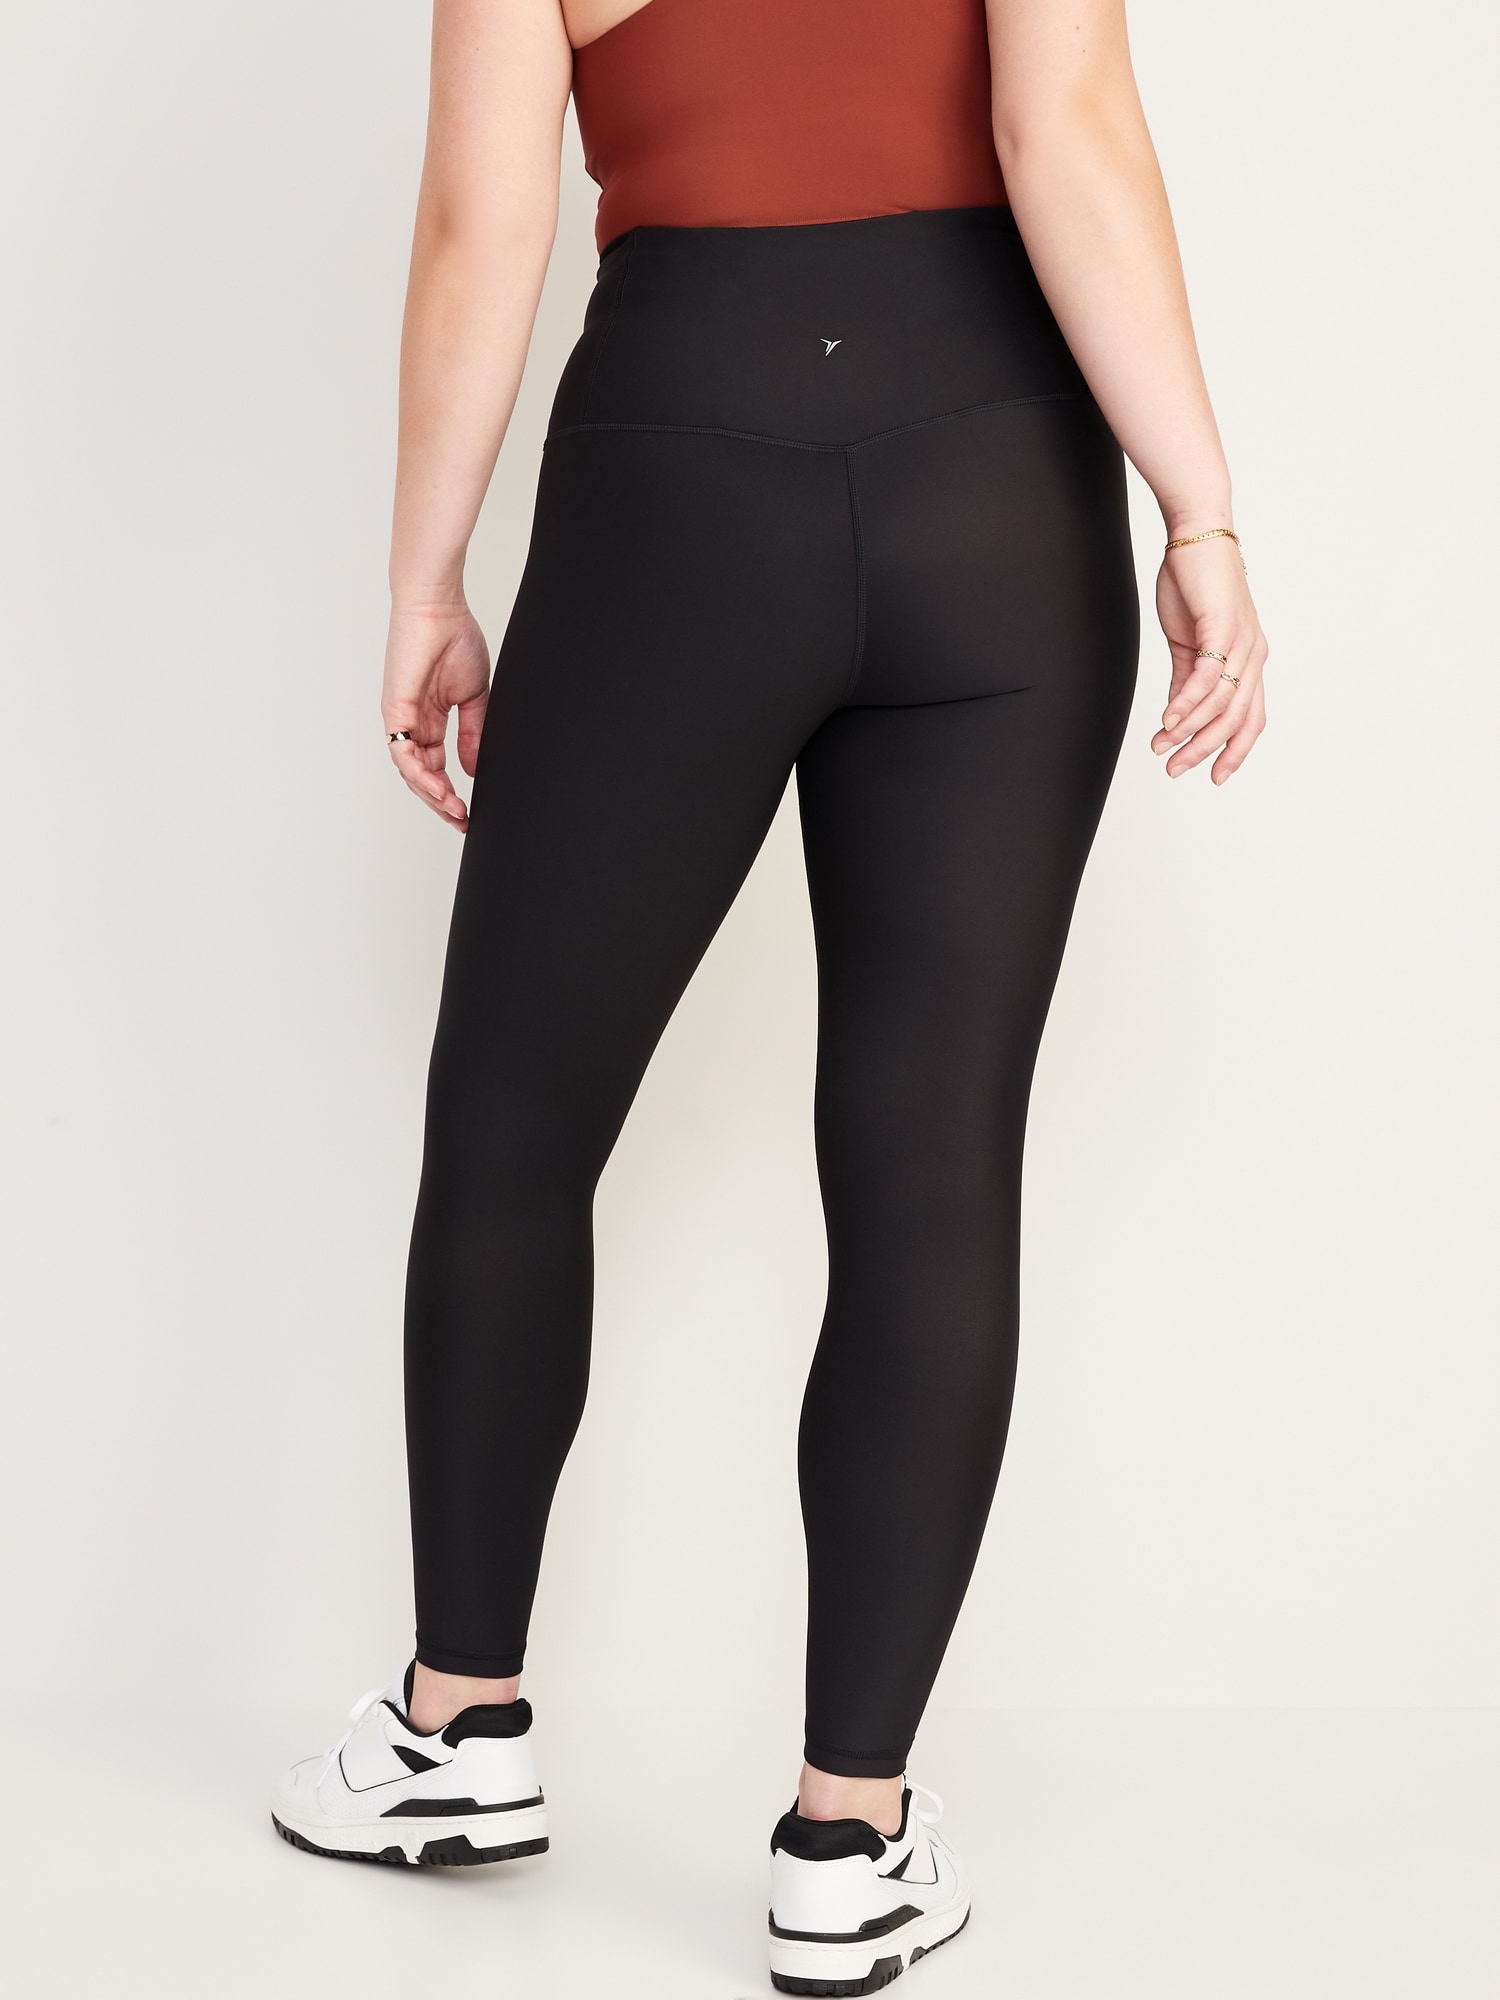 Extra High-Waisted PowerSoft Crop Leggings for Women